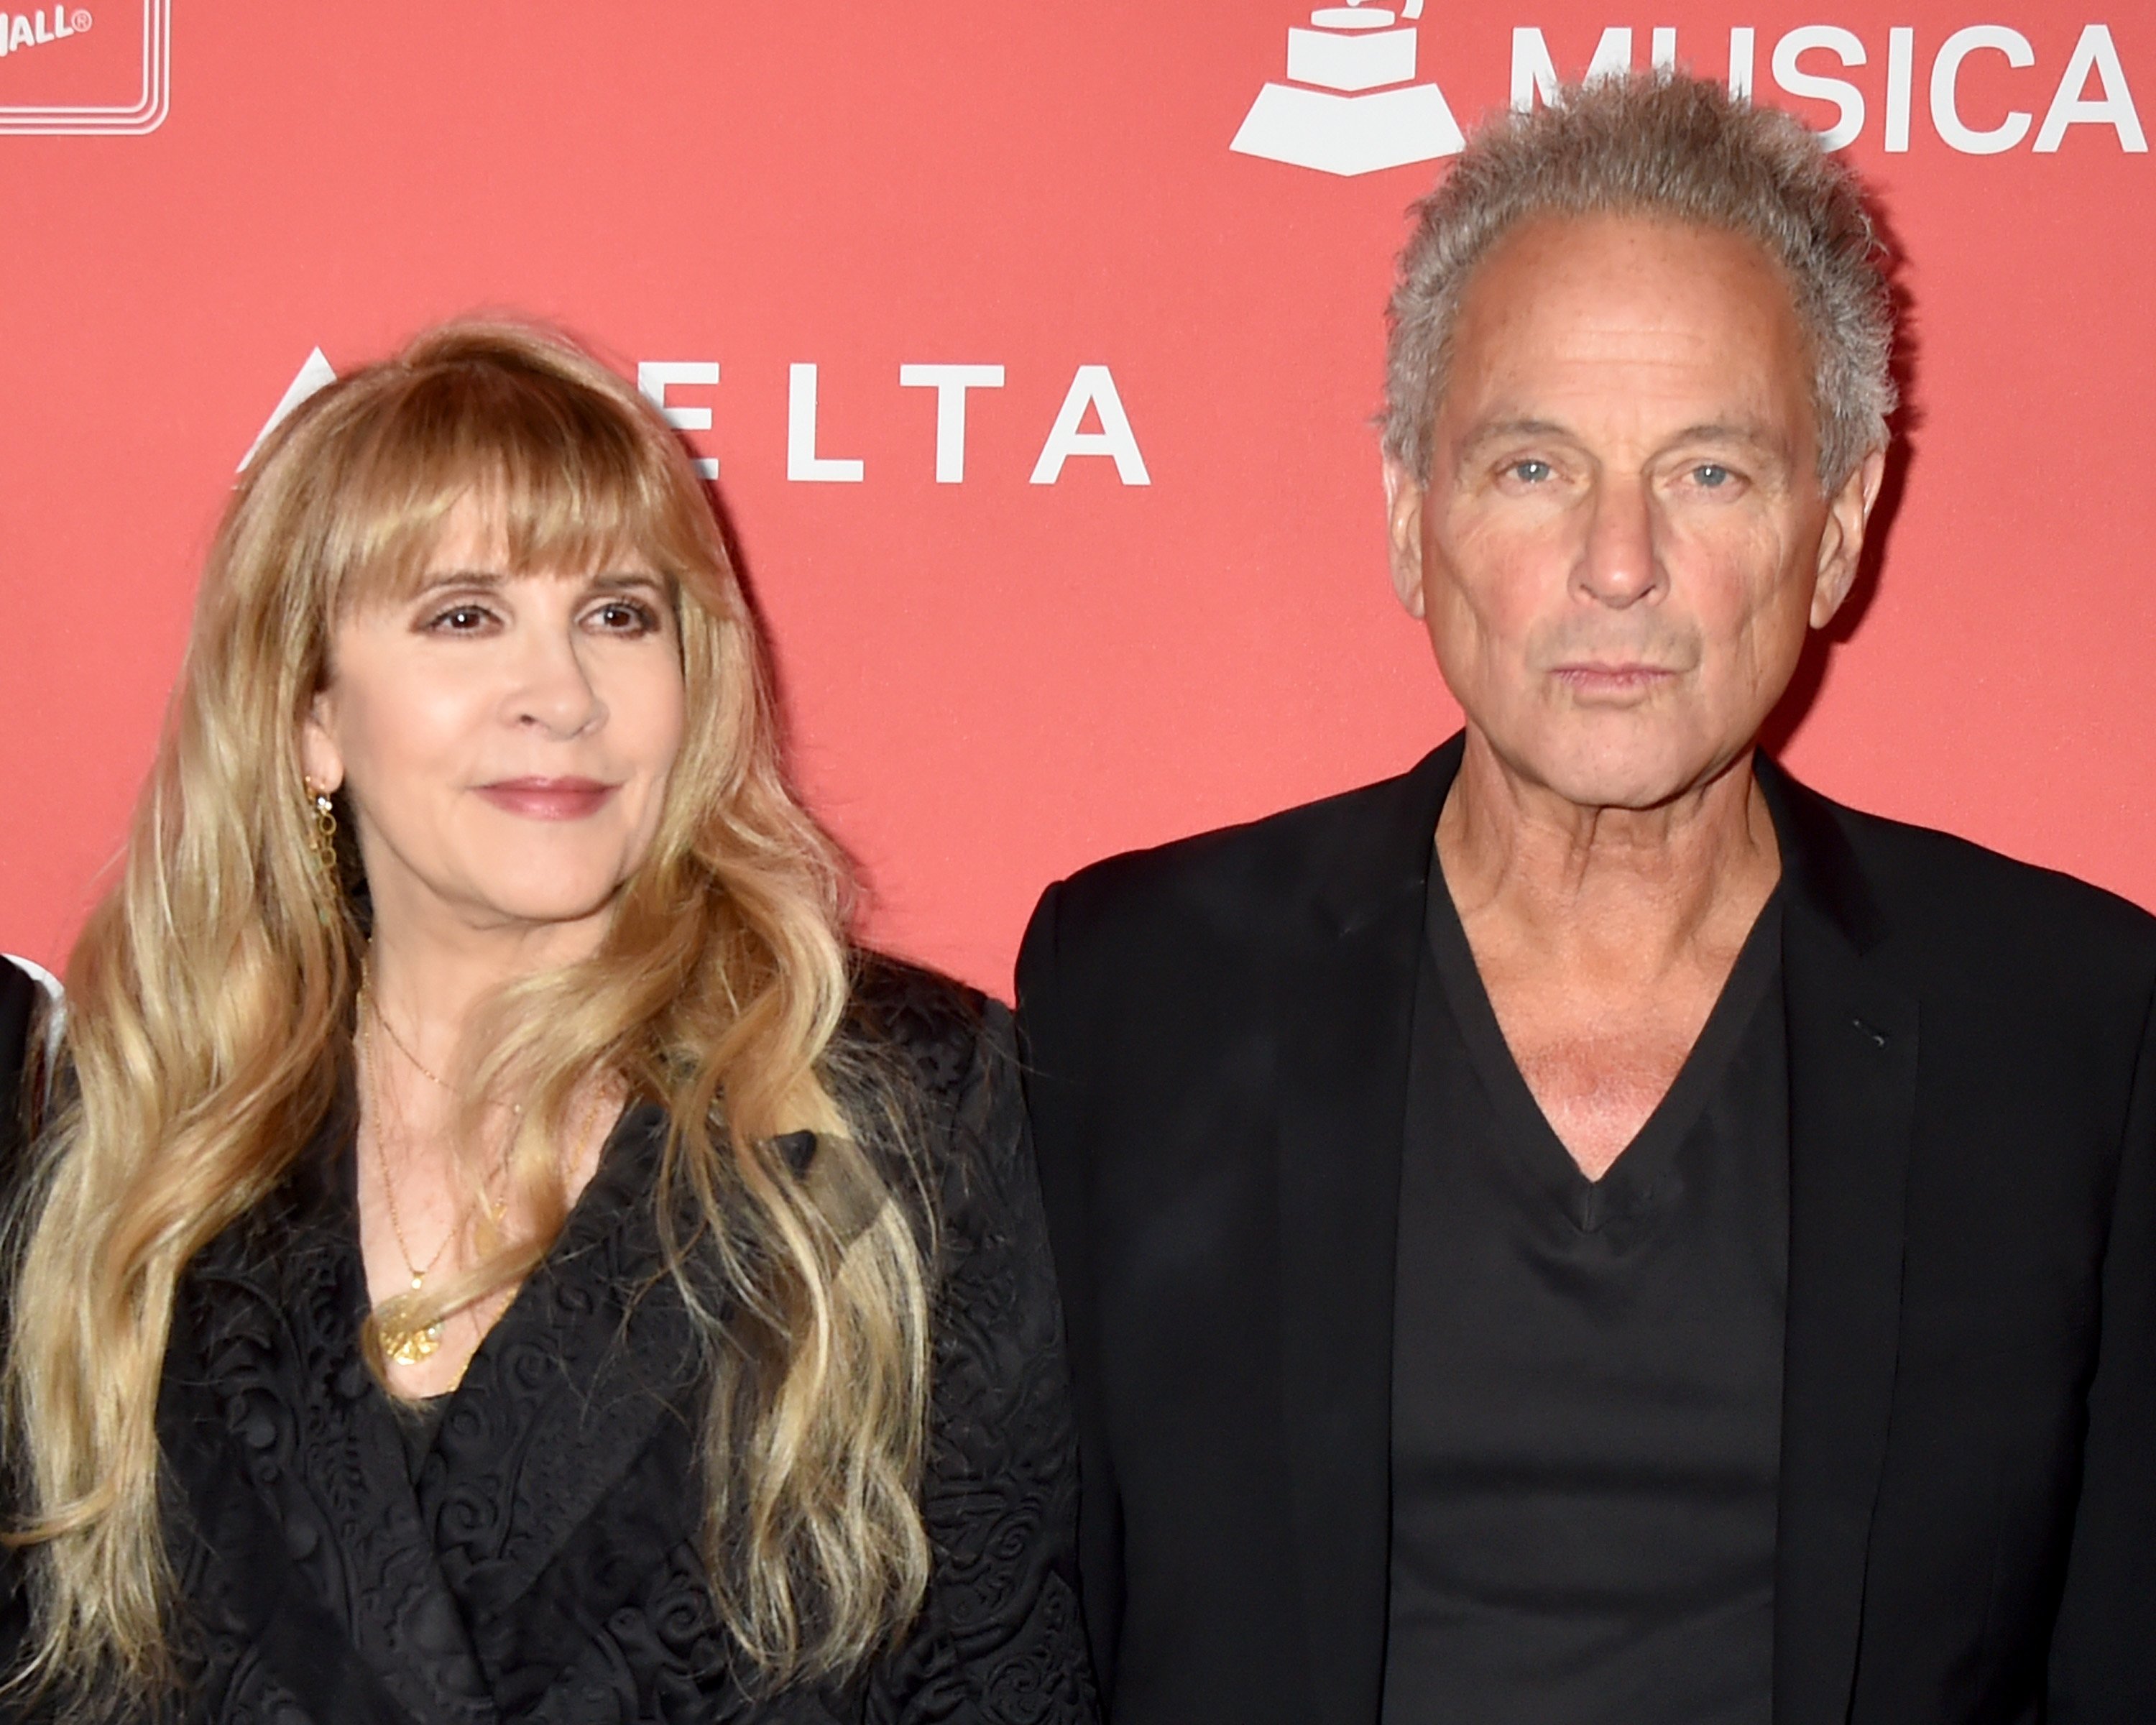 Stevie Nicks and Lindsey Buckingham both wear black and stand in front of a red background. 